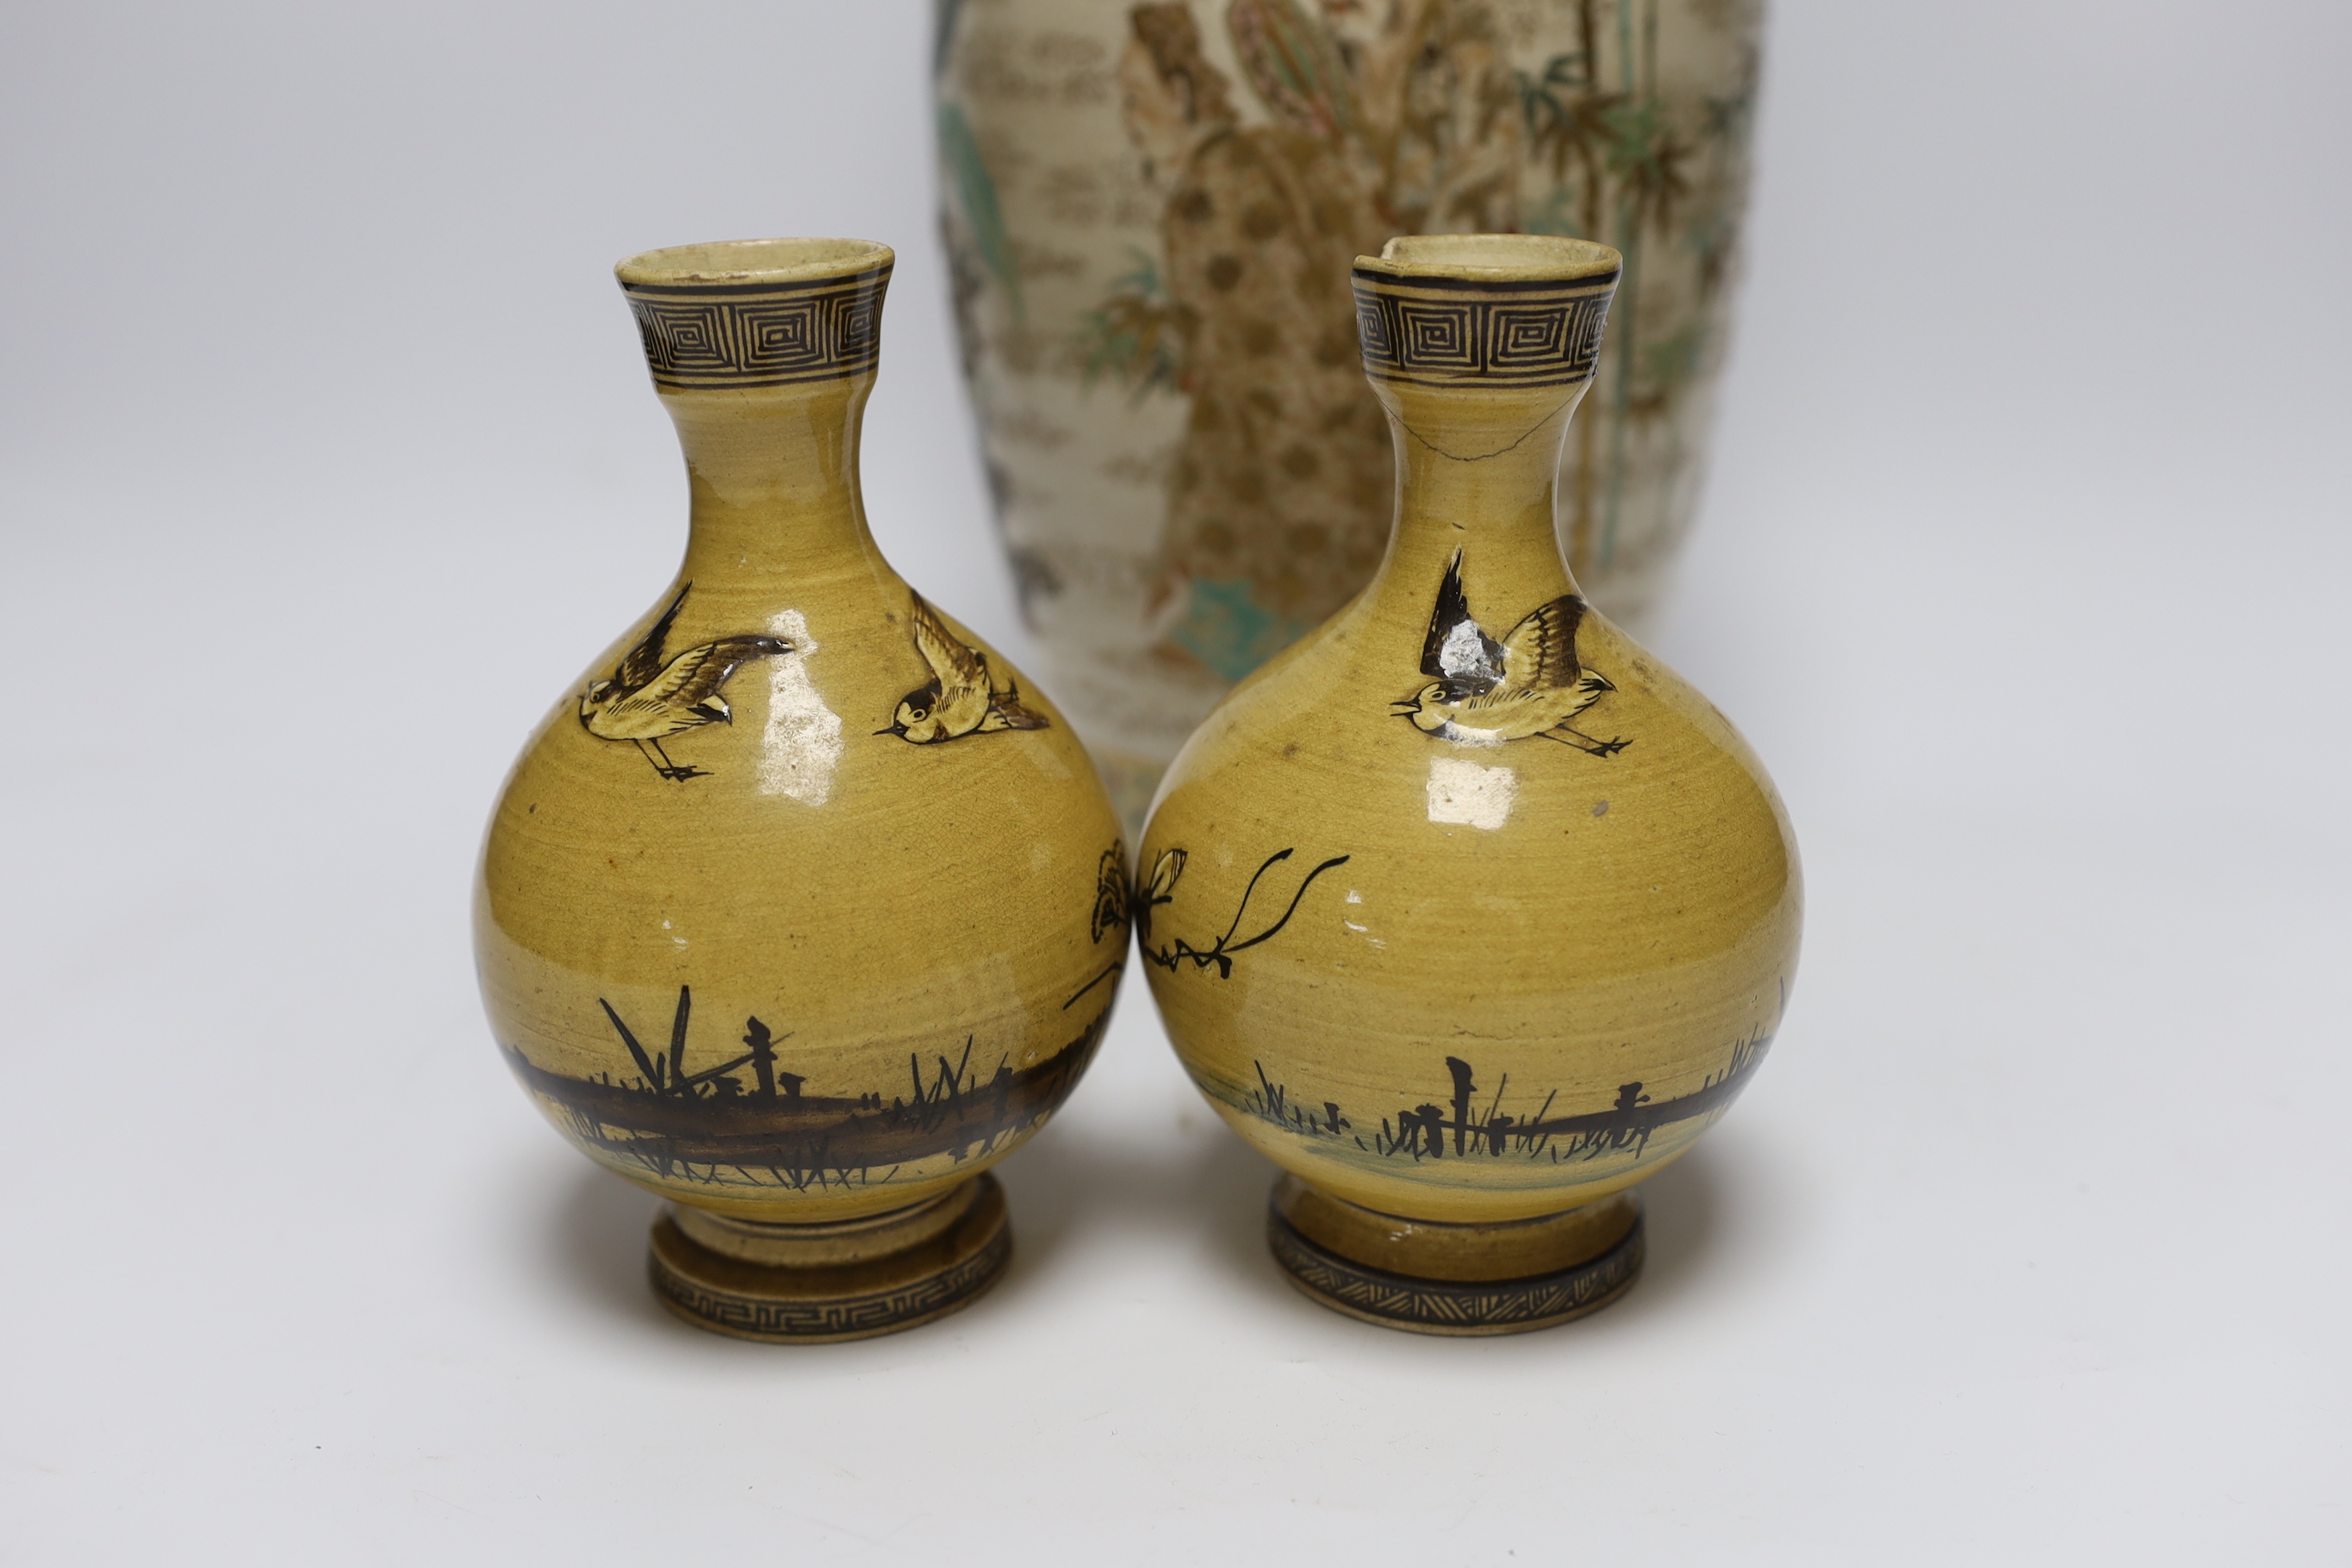 A 19th century Satsuma vase, two ochre pottery vases and a fish designed bowl, (purported to come - Image 5 of 11